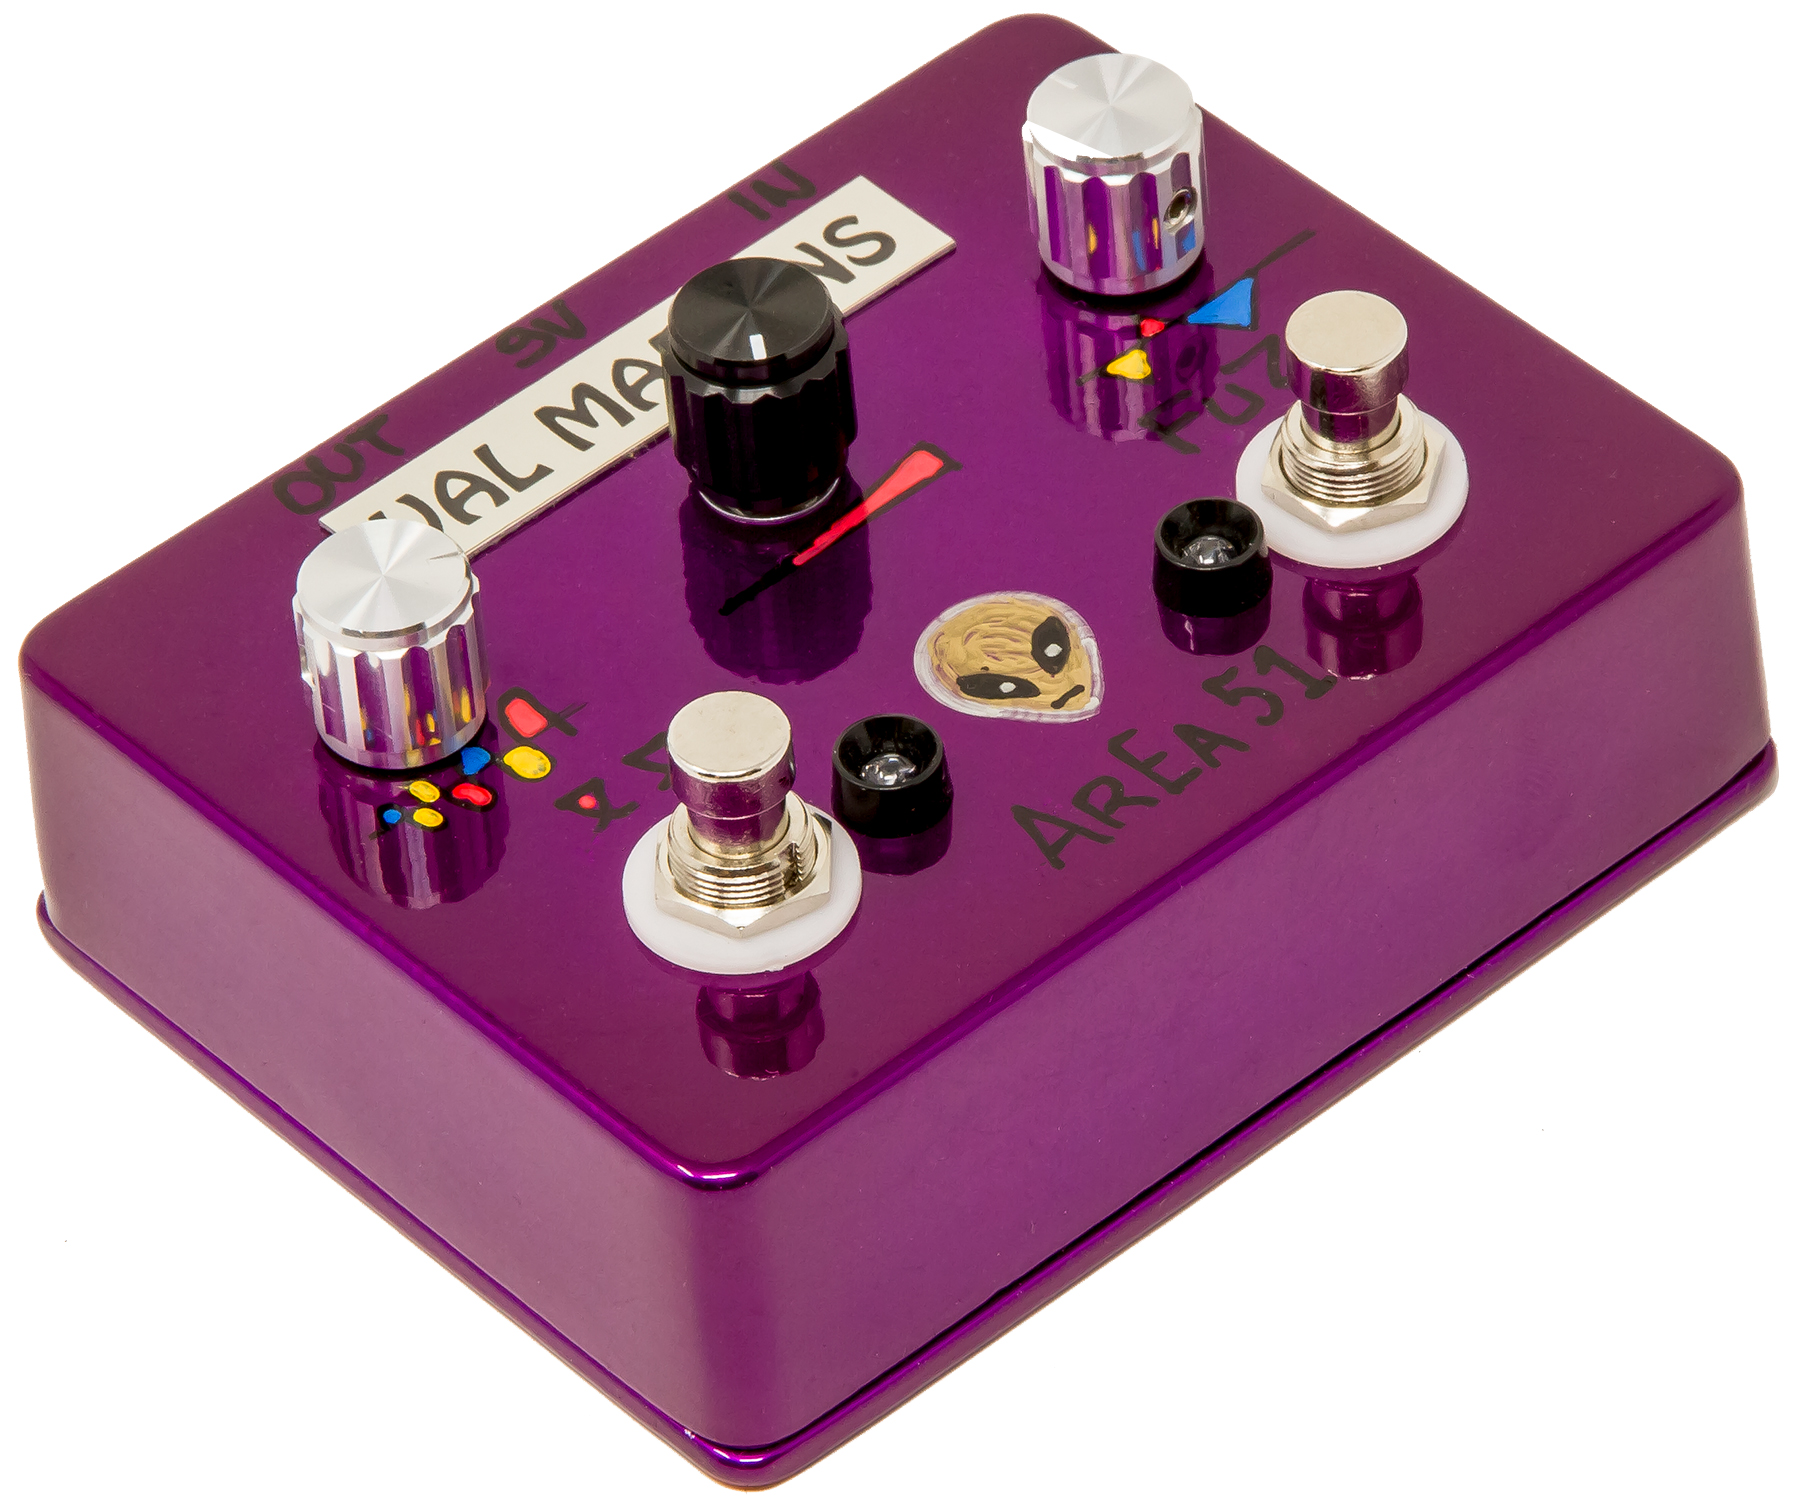 Val Martins Area 51 Octa Fuzz - Overdrive, distortion & fuzz effect pedal - Variation 1